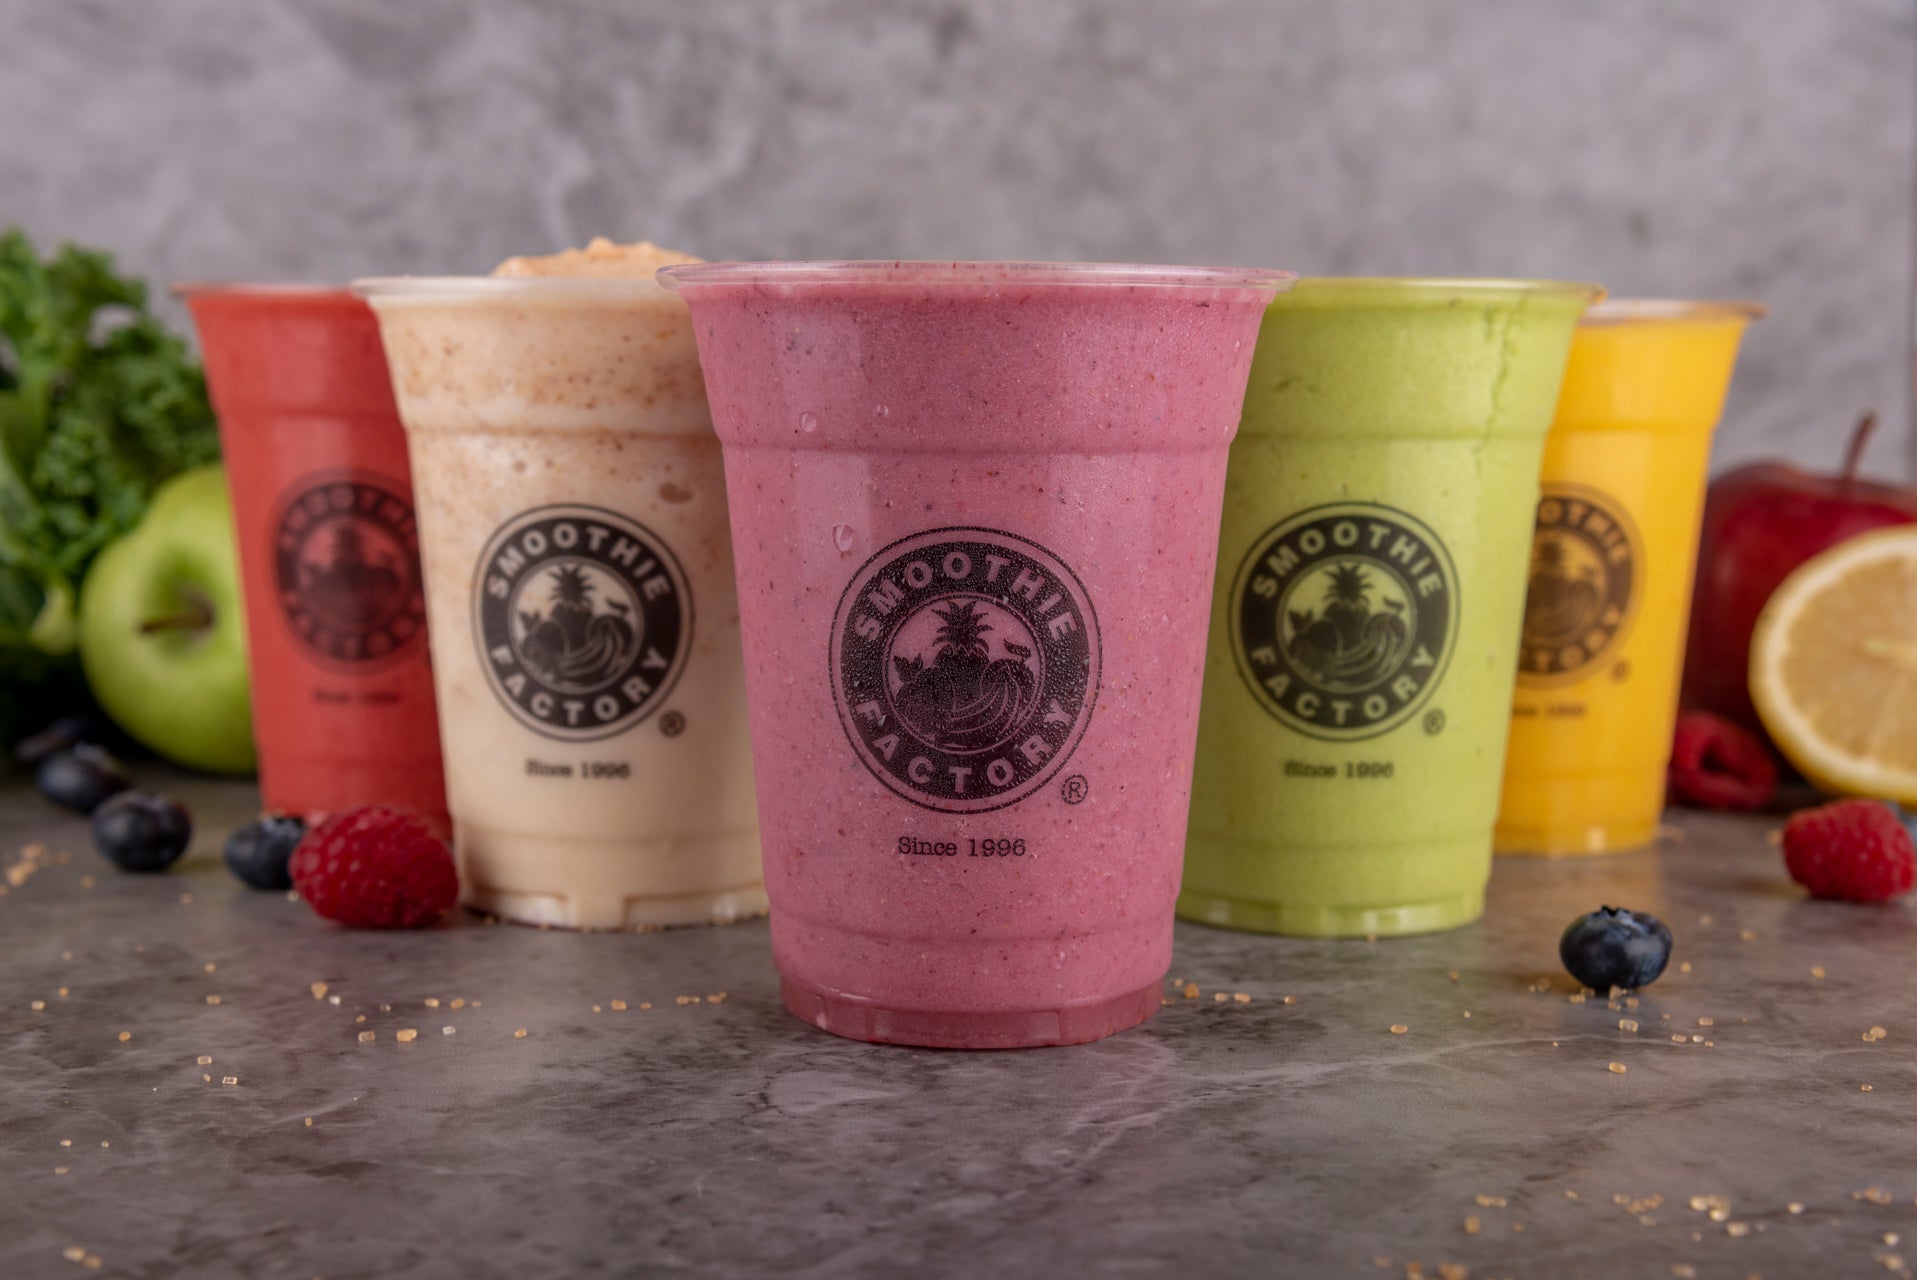 Smoothie Factory delivery from Downtown - Order with Deliveroo